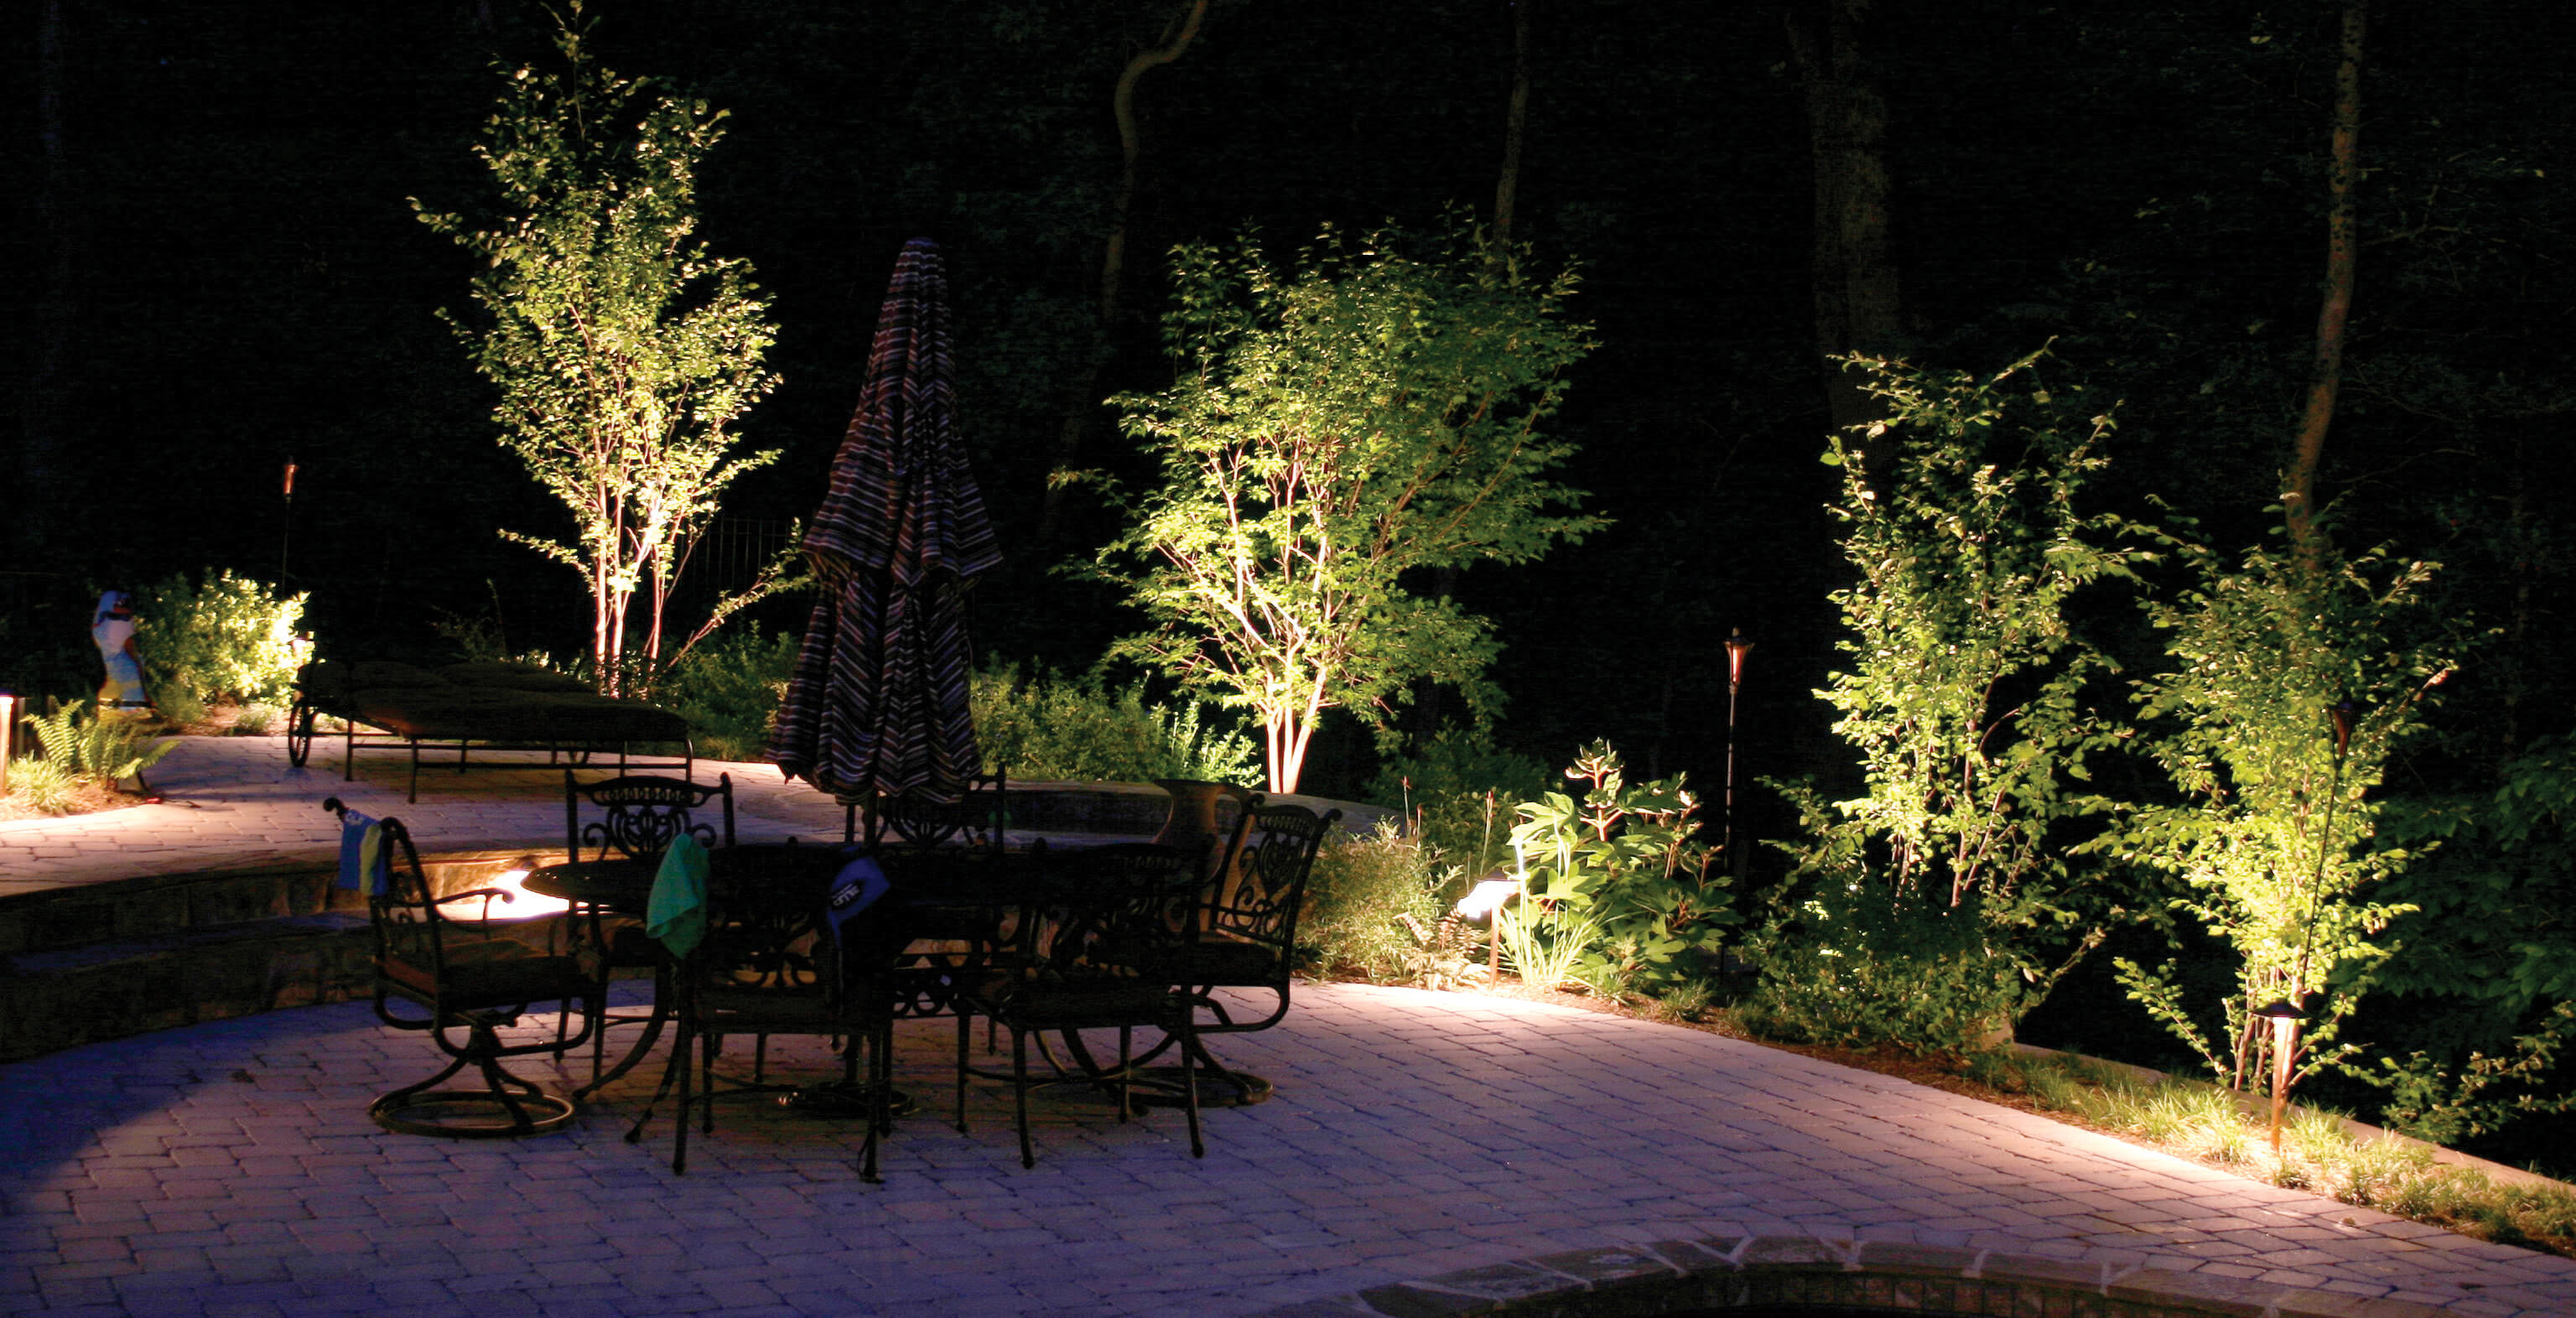 Outdoor seating area with lighting